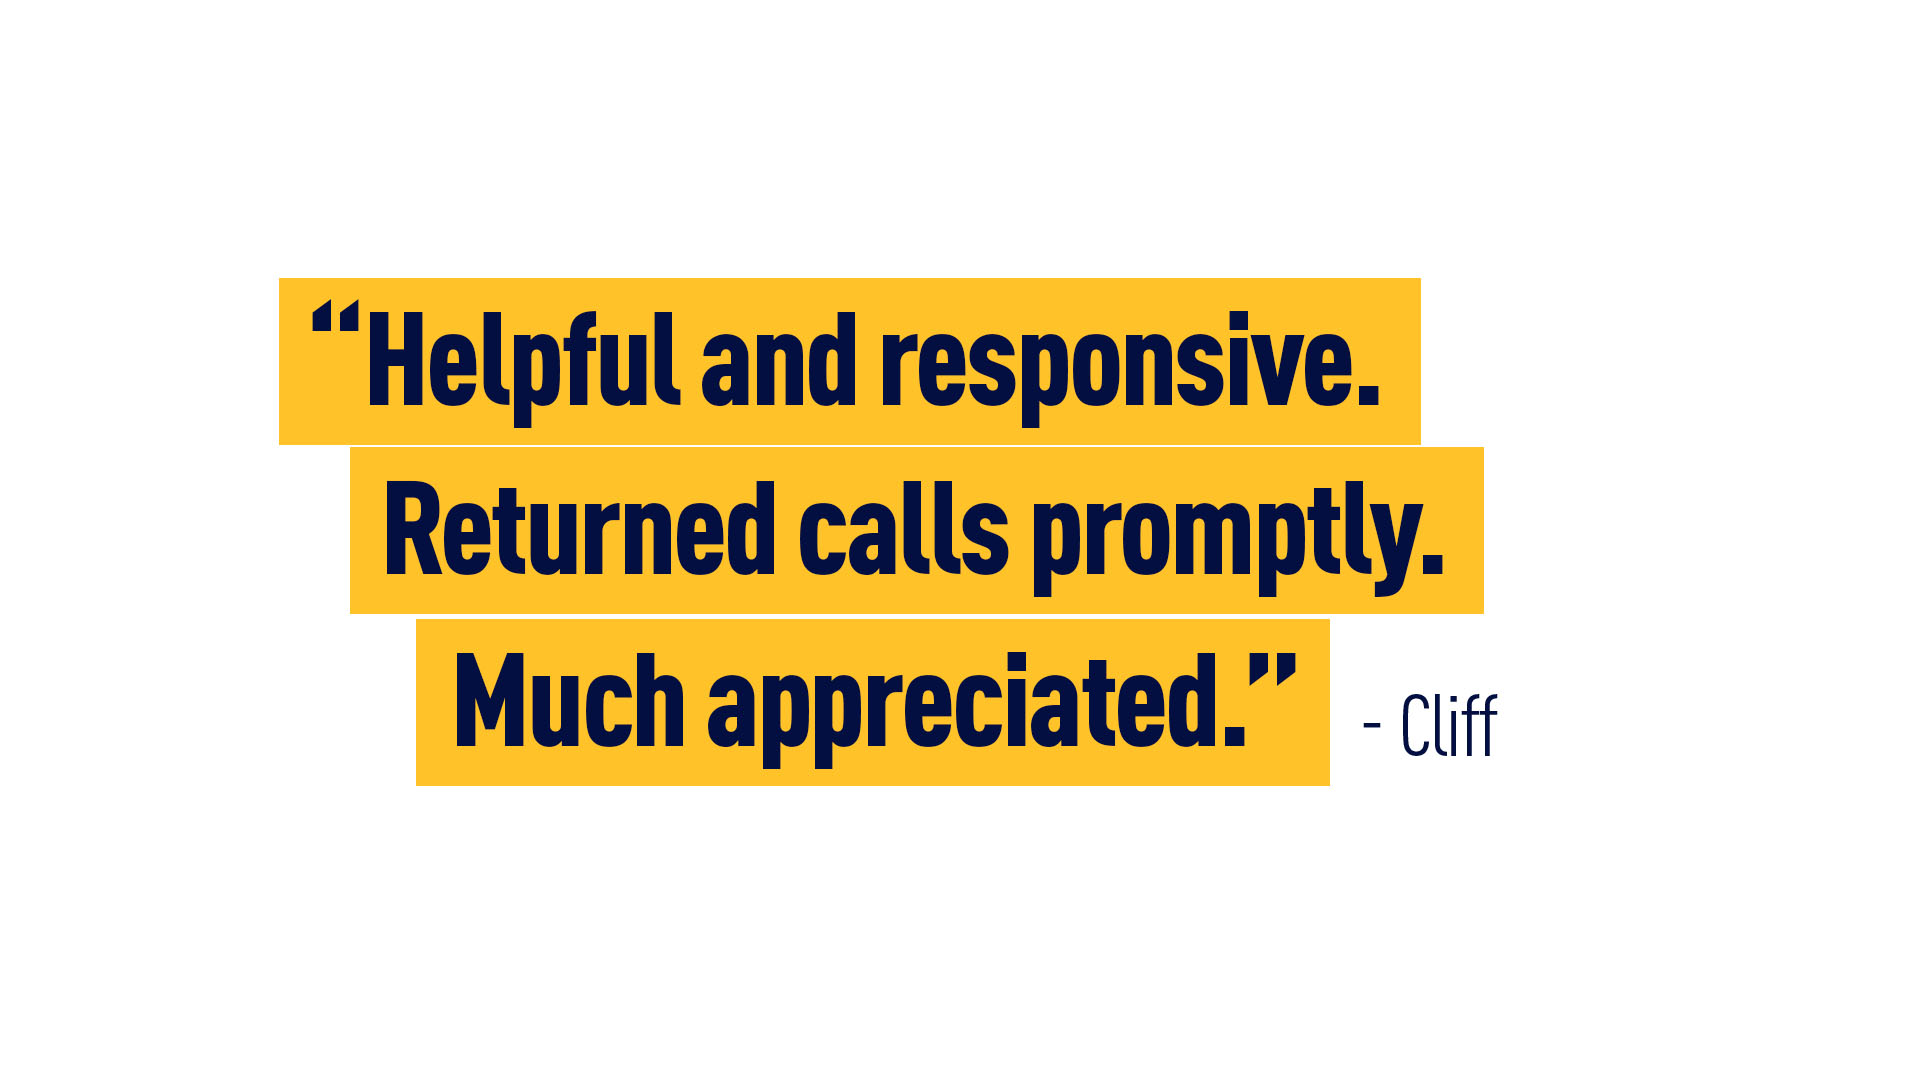 Cliff – “Helpful and responsive. Returned calls promptly. Much appreciated.”